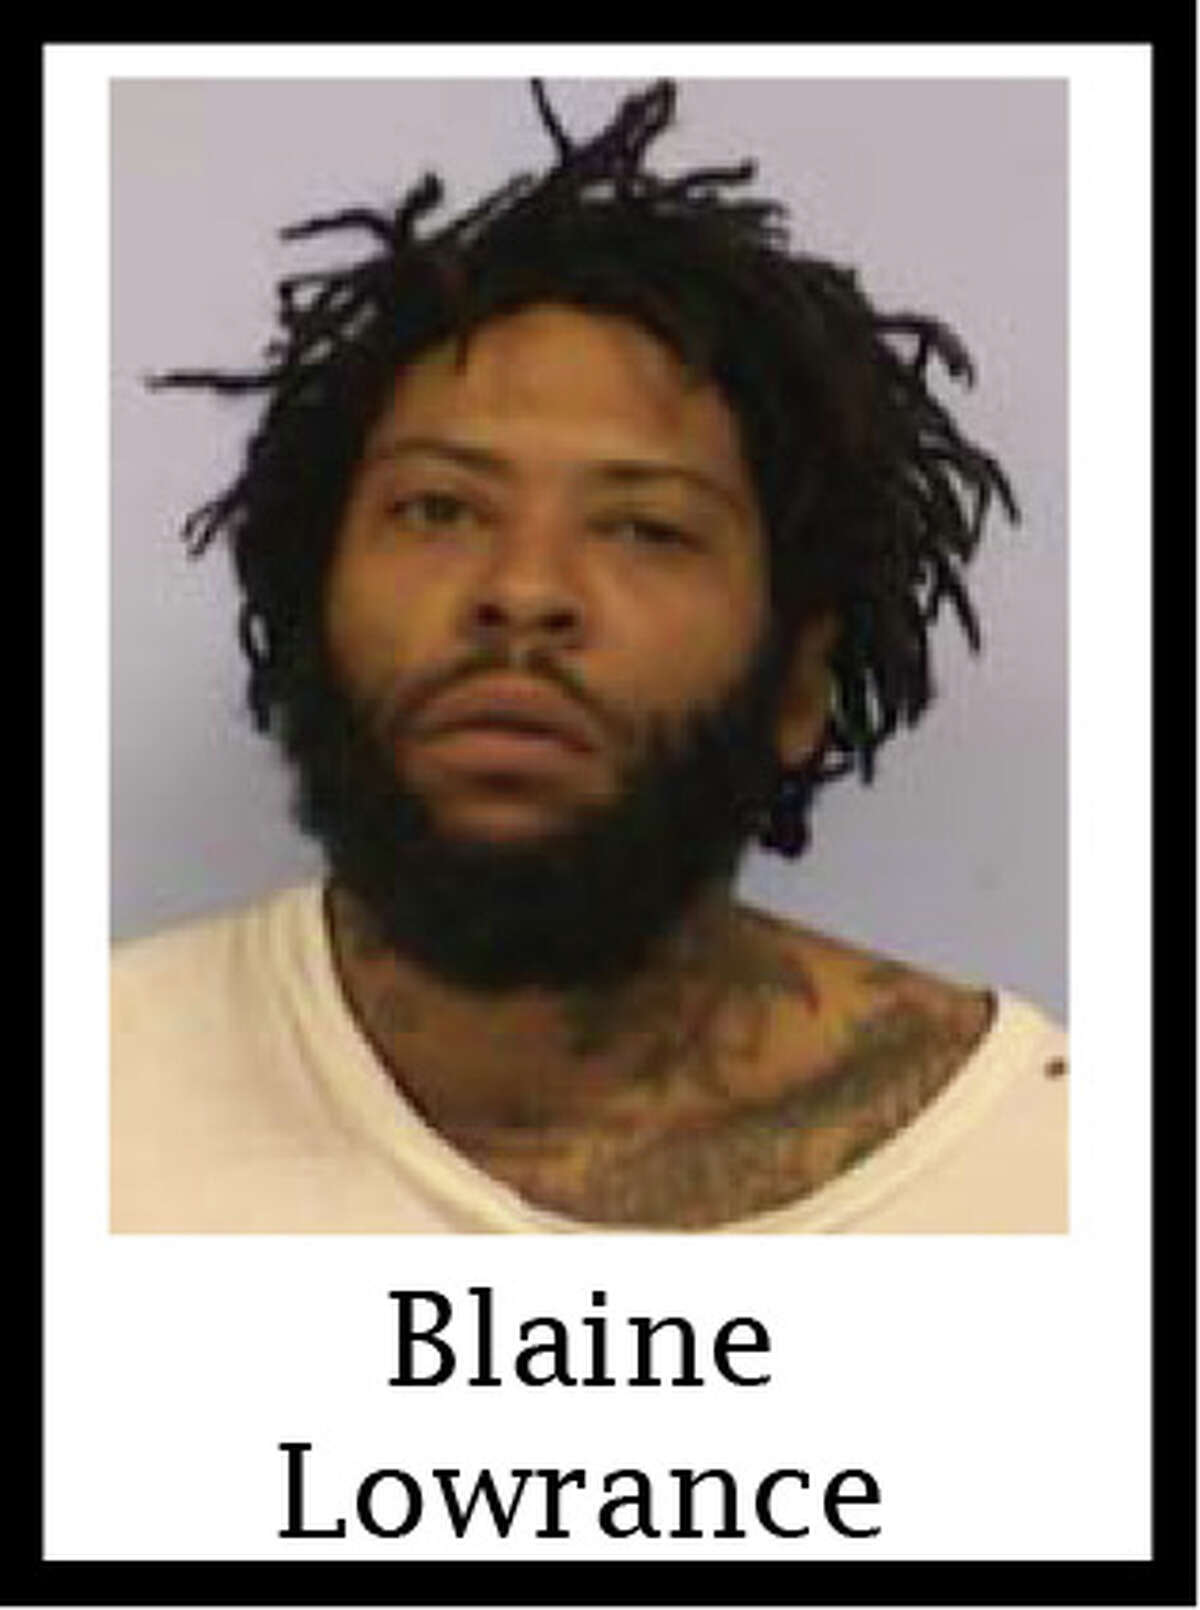 Blaine Lowrance Charge: Possession of a Controlled Substance with Intent to Distribute (First-Degree Felony)